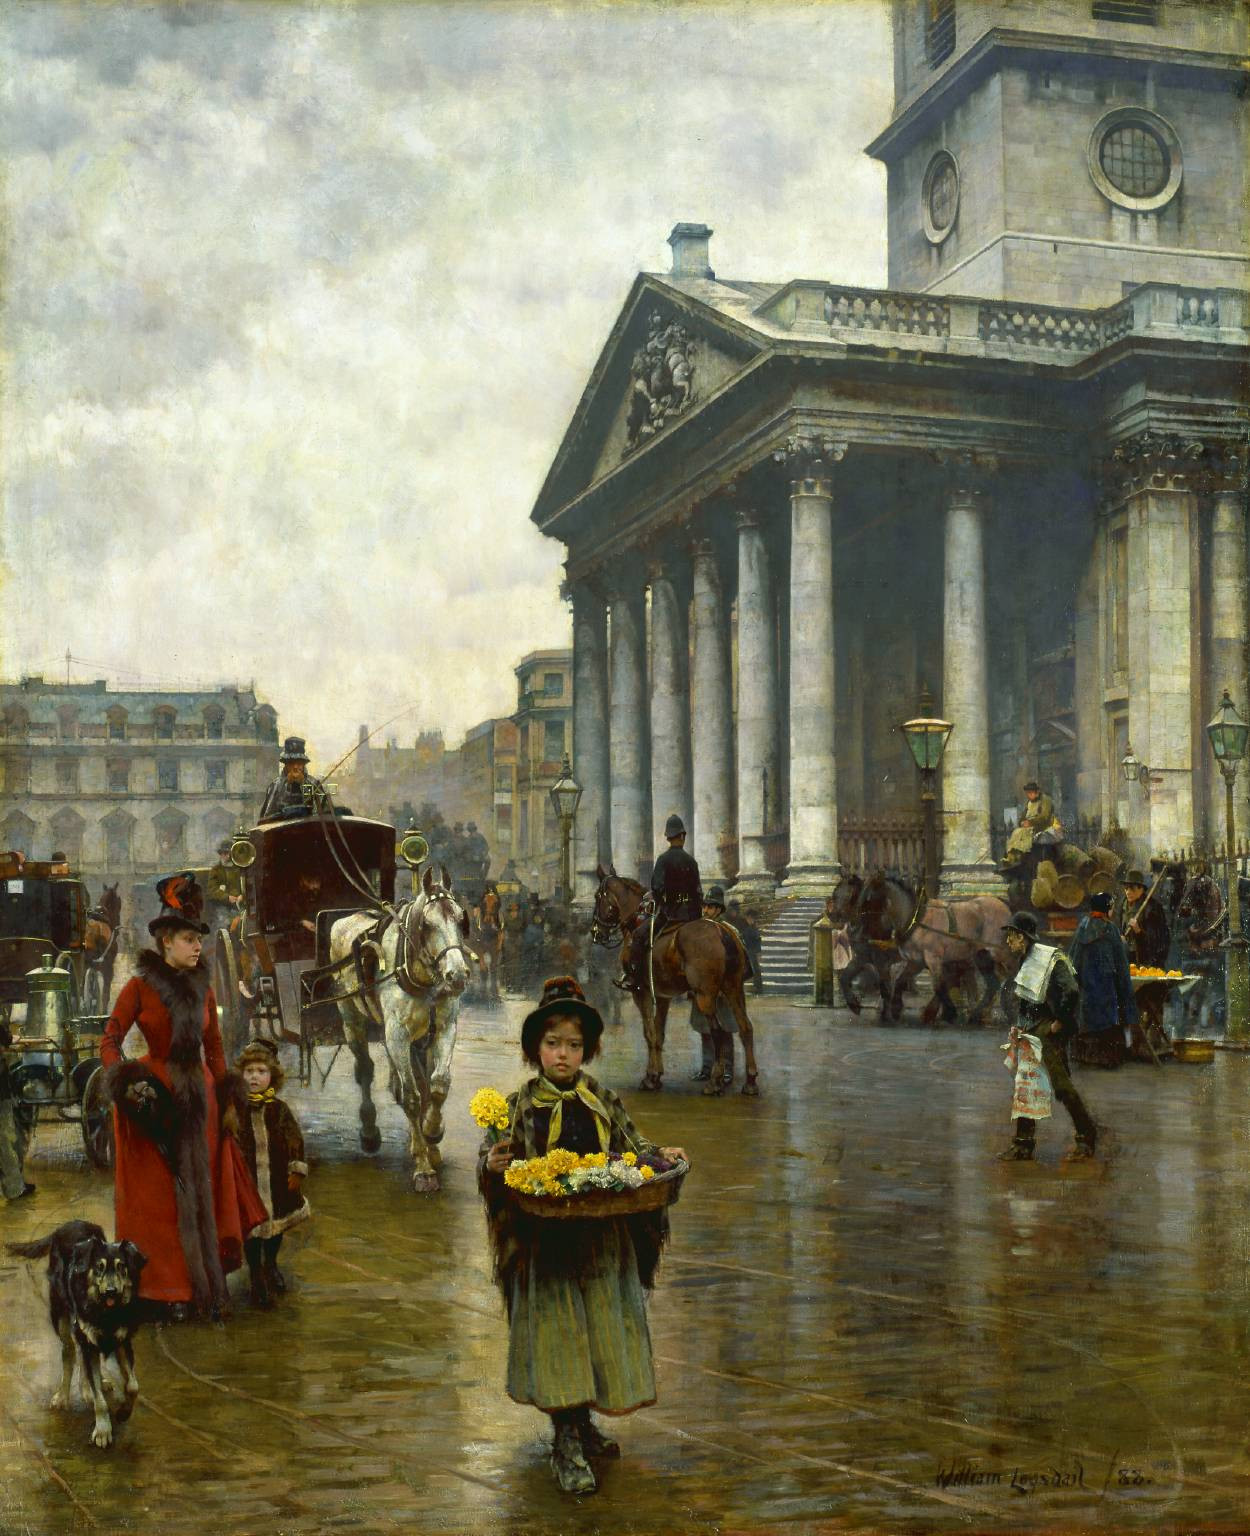 St Martin-in-the-Fields by William Logsdail, 1888